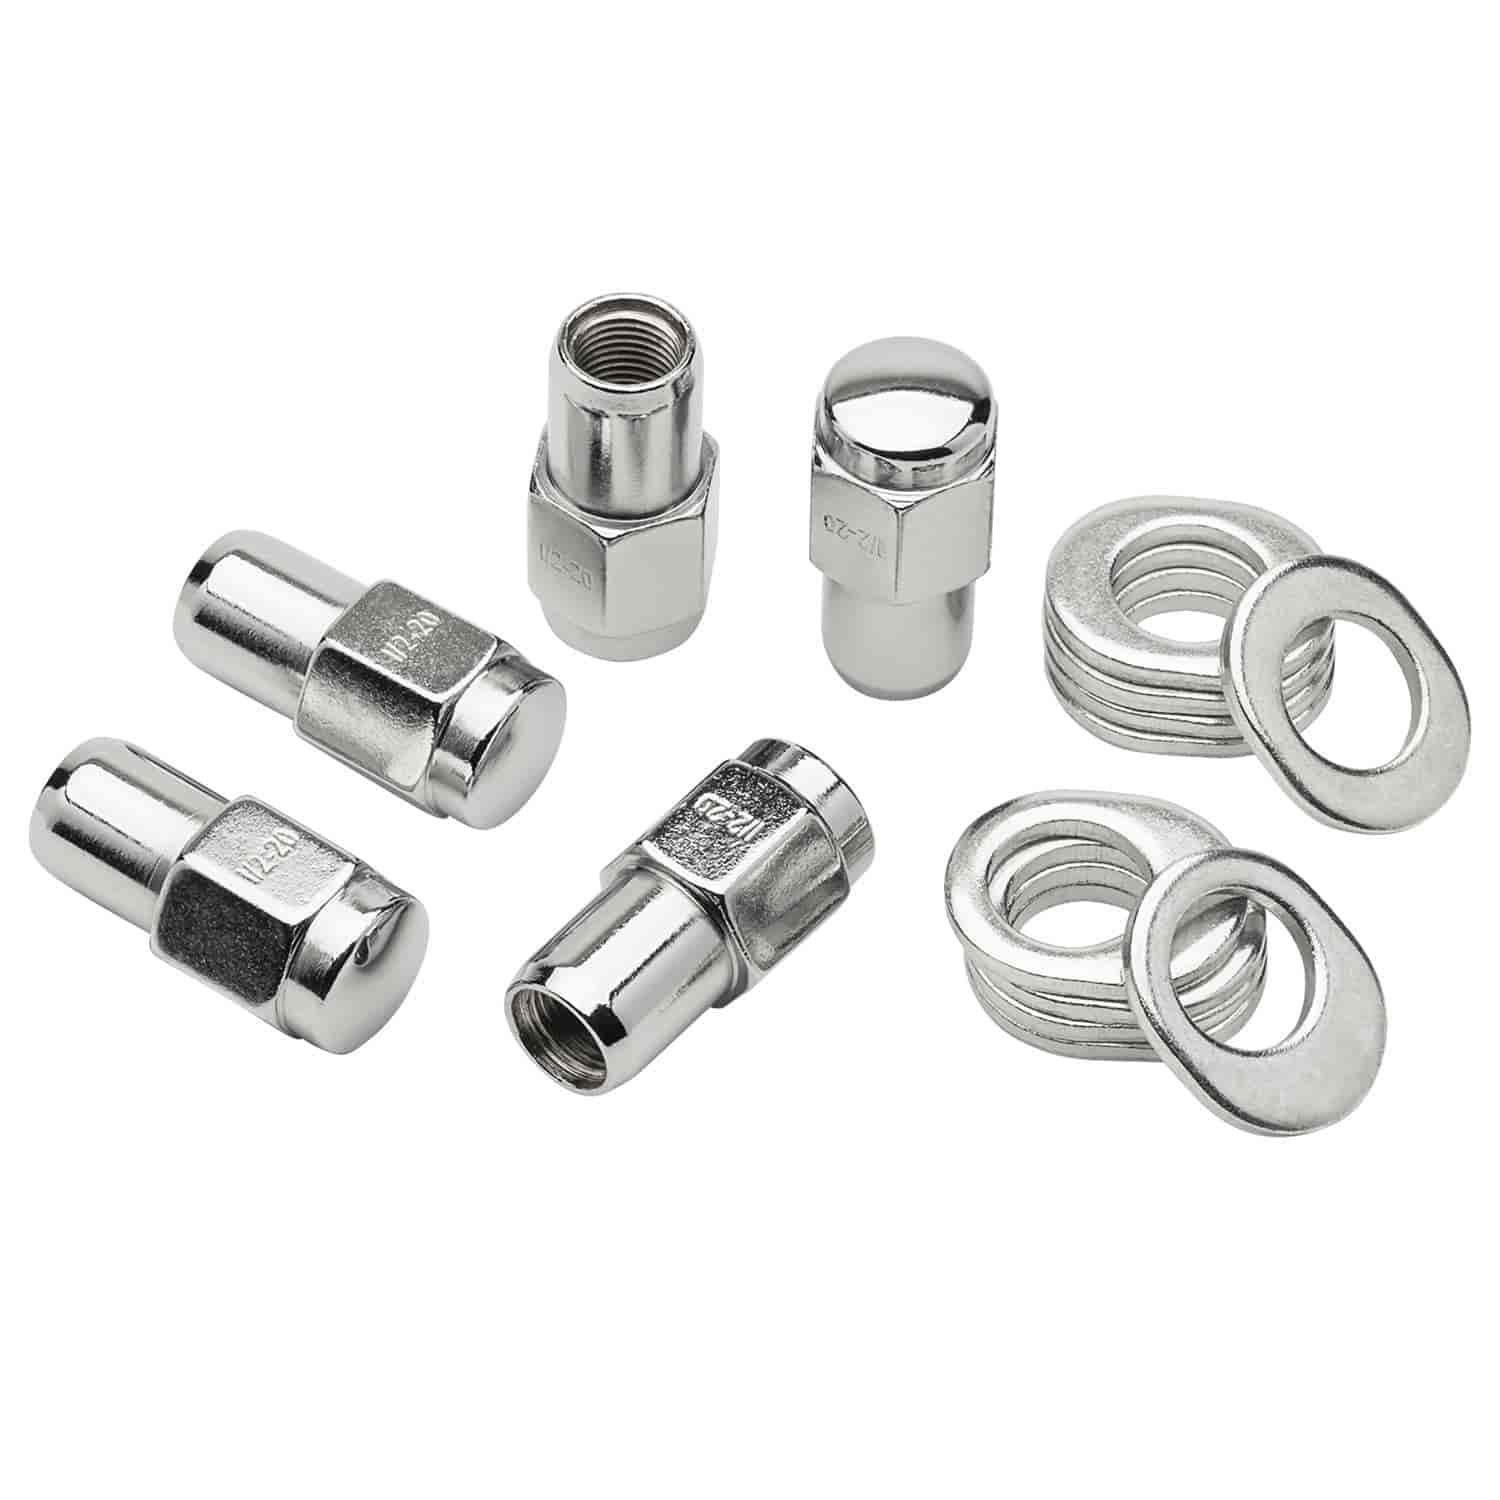 Lug Nuts with Center & Offset Washers 1/2" RH Thread